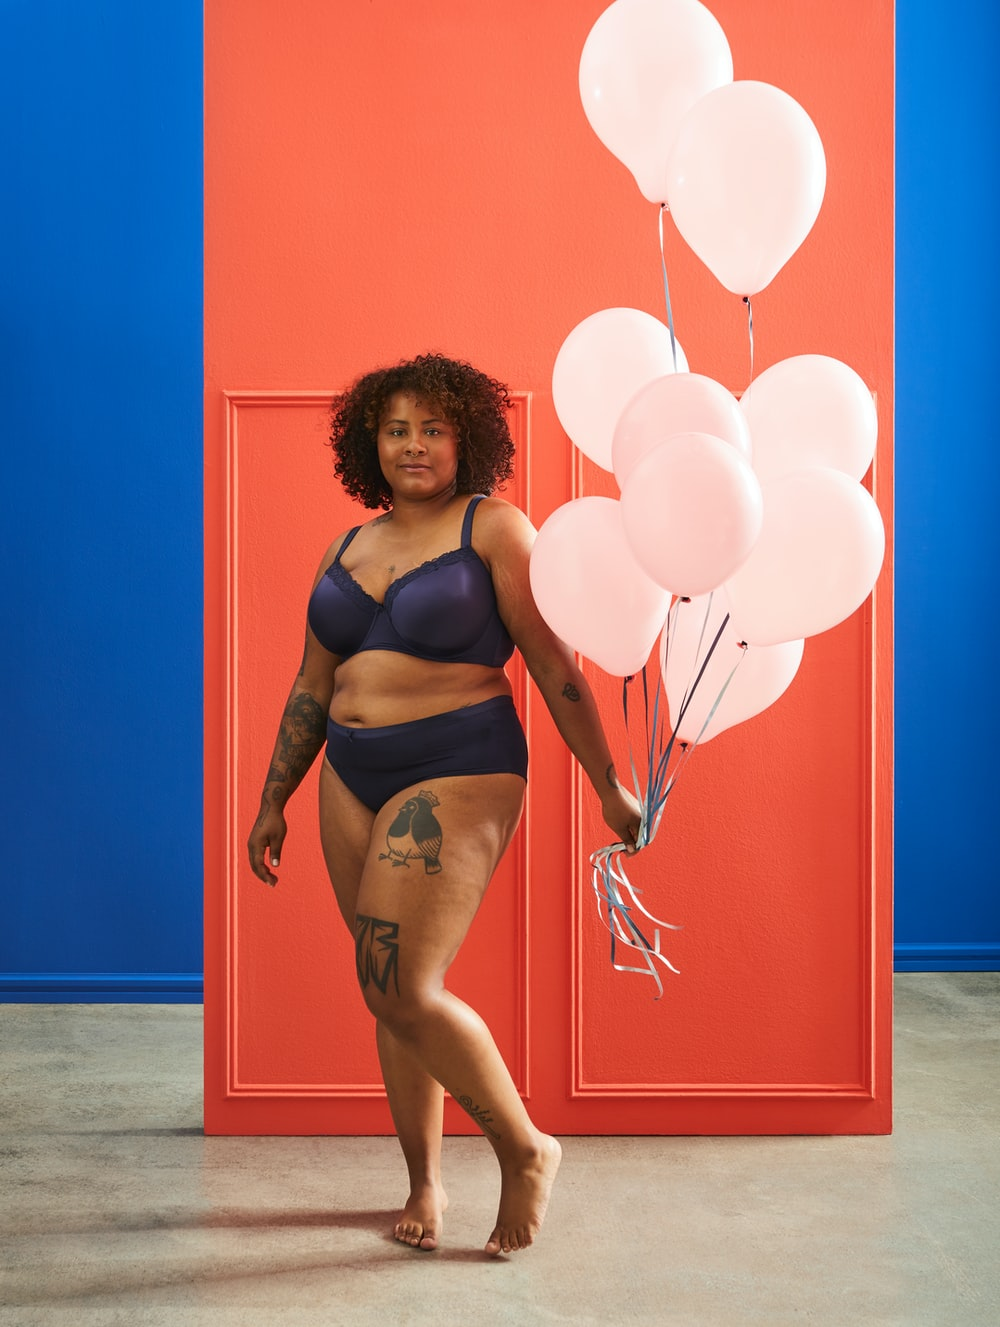 A plus-size woman holding balloons